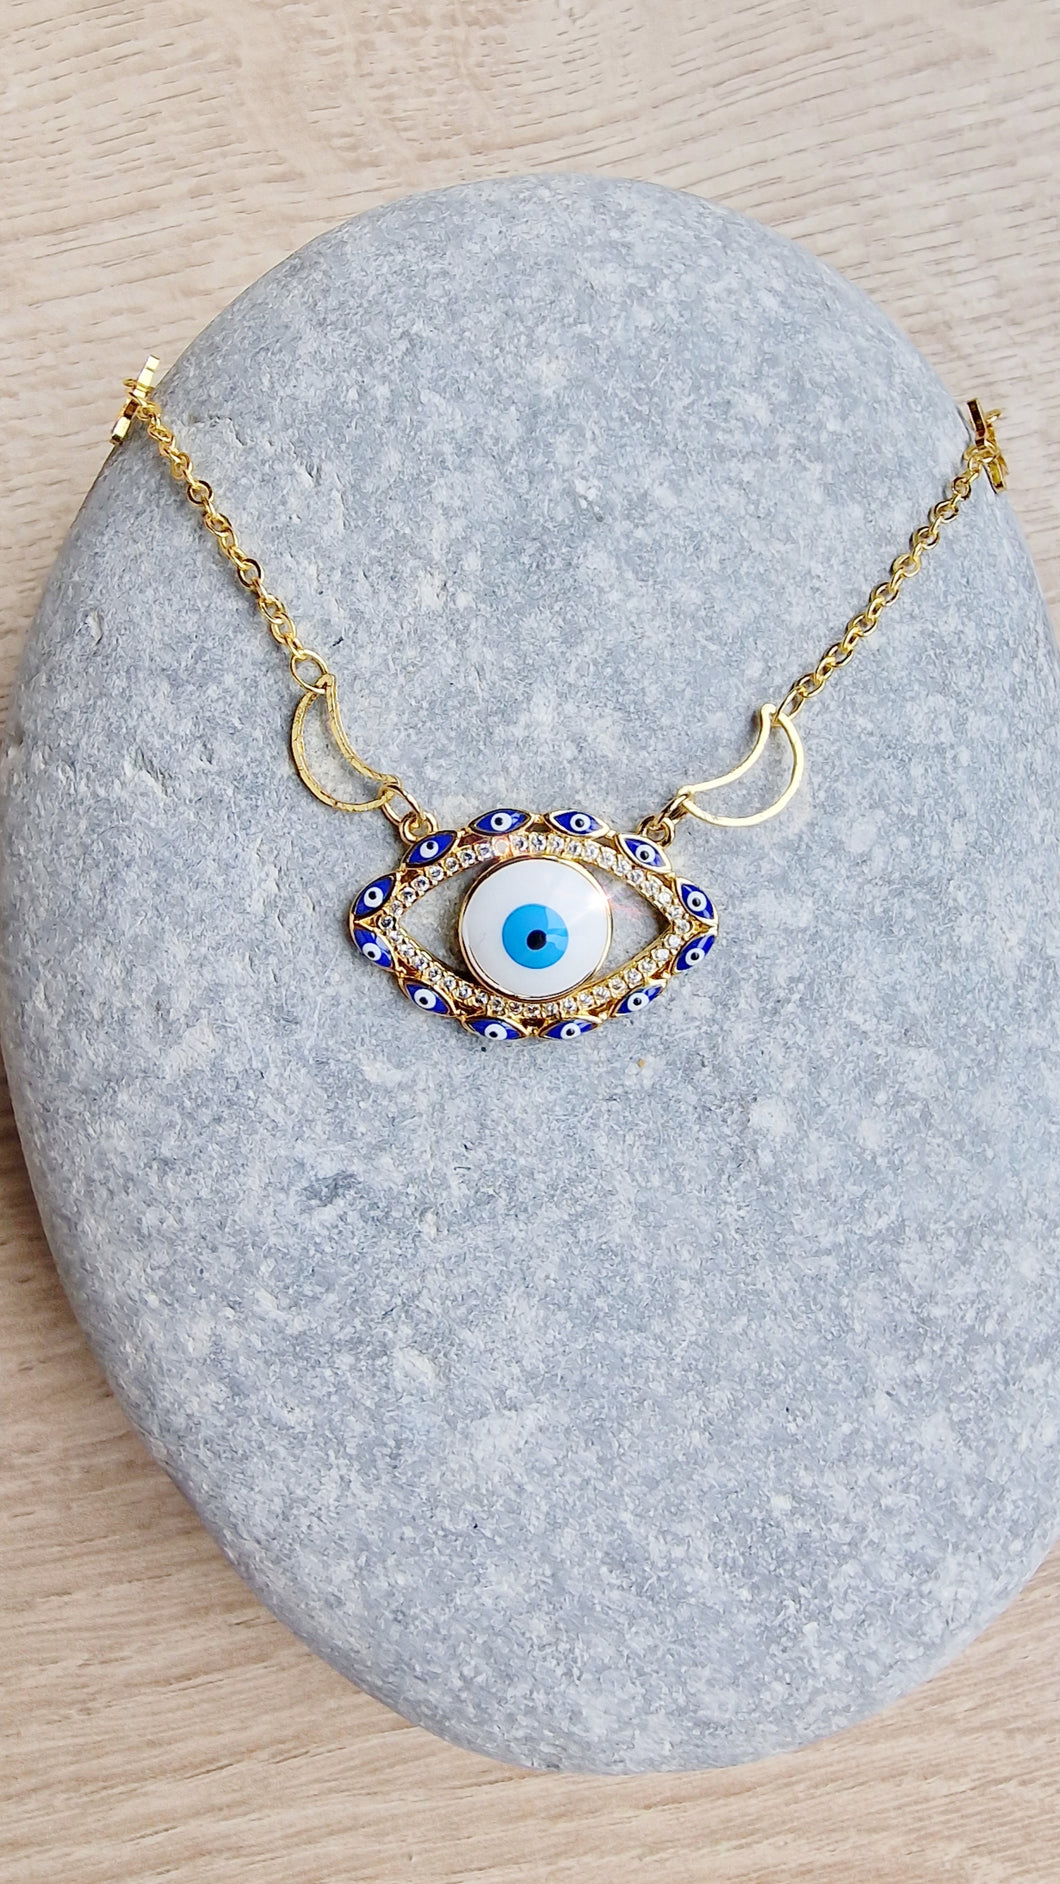 Evil eye necklece with moon and star chain